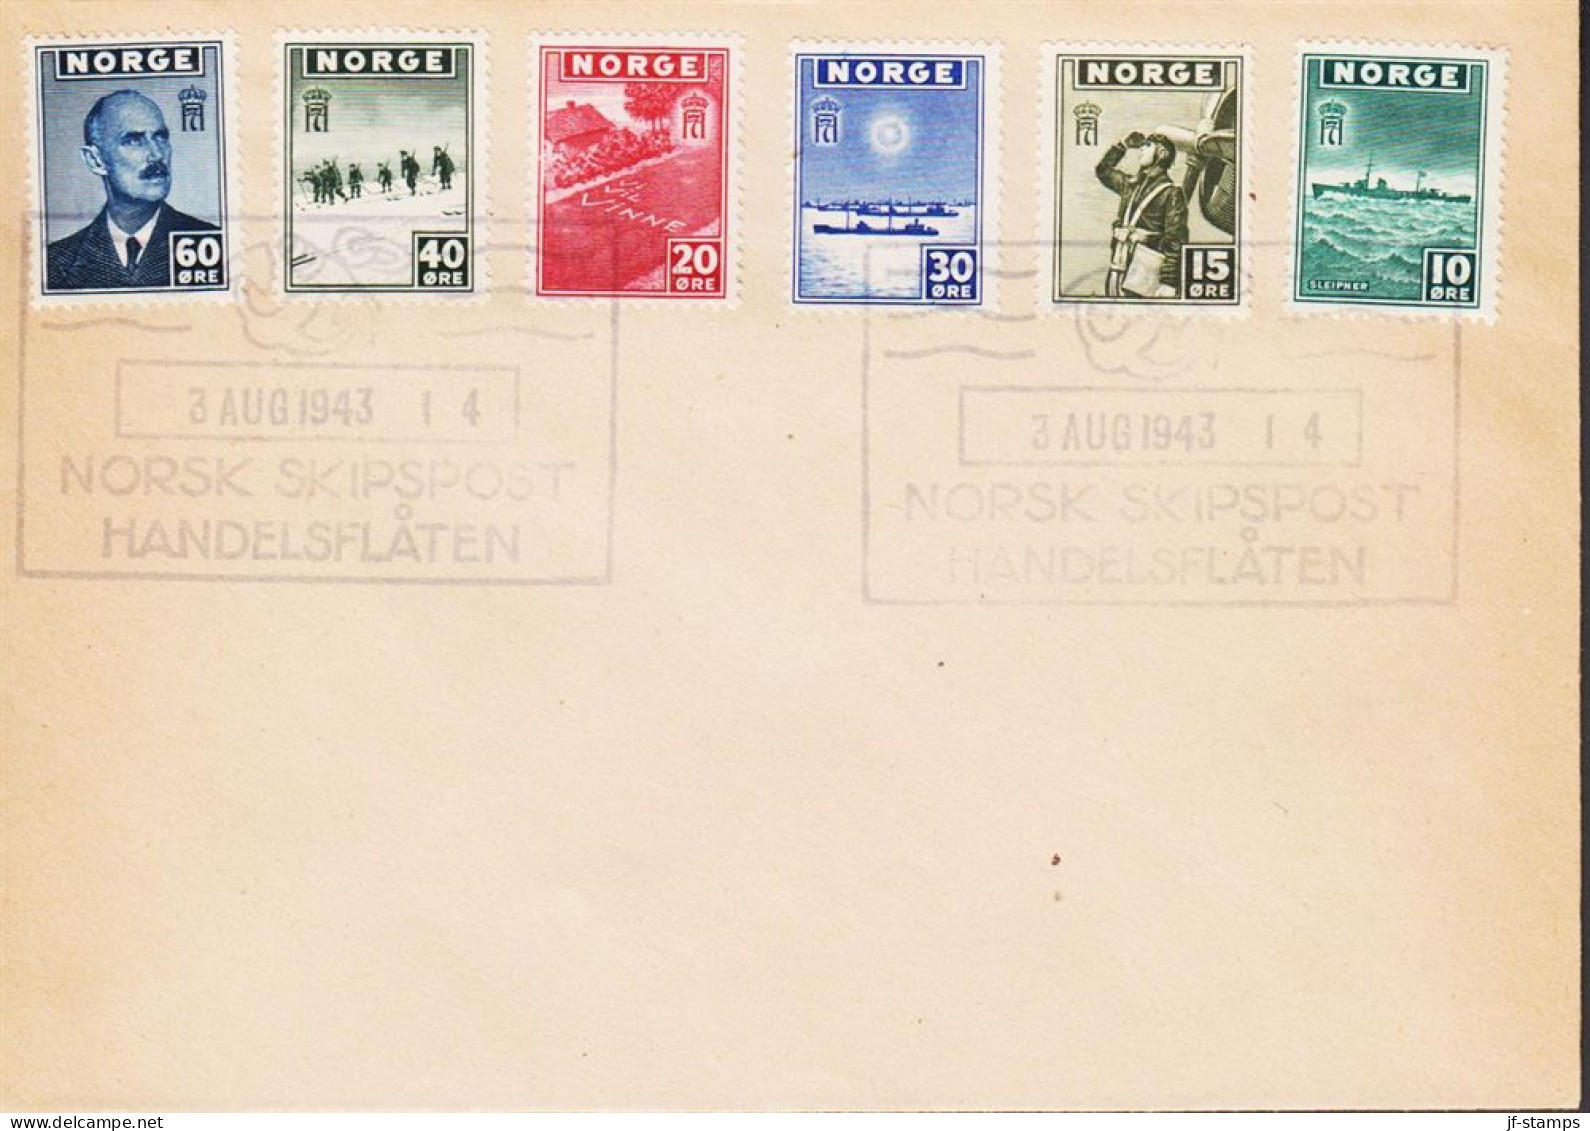 1943. NORGE. Fine Envelope With 10, 15, 20, 30 40 And 60 ØRE London Issue Cancelled With ... (Michel 278-283) - JF545675 - Brieven En Documenten